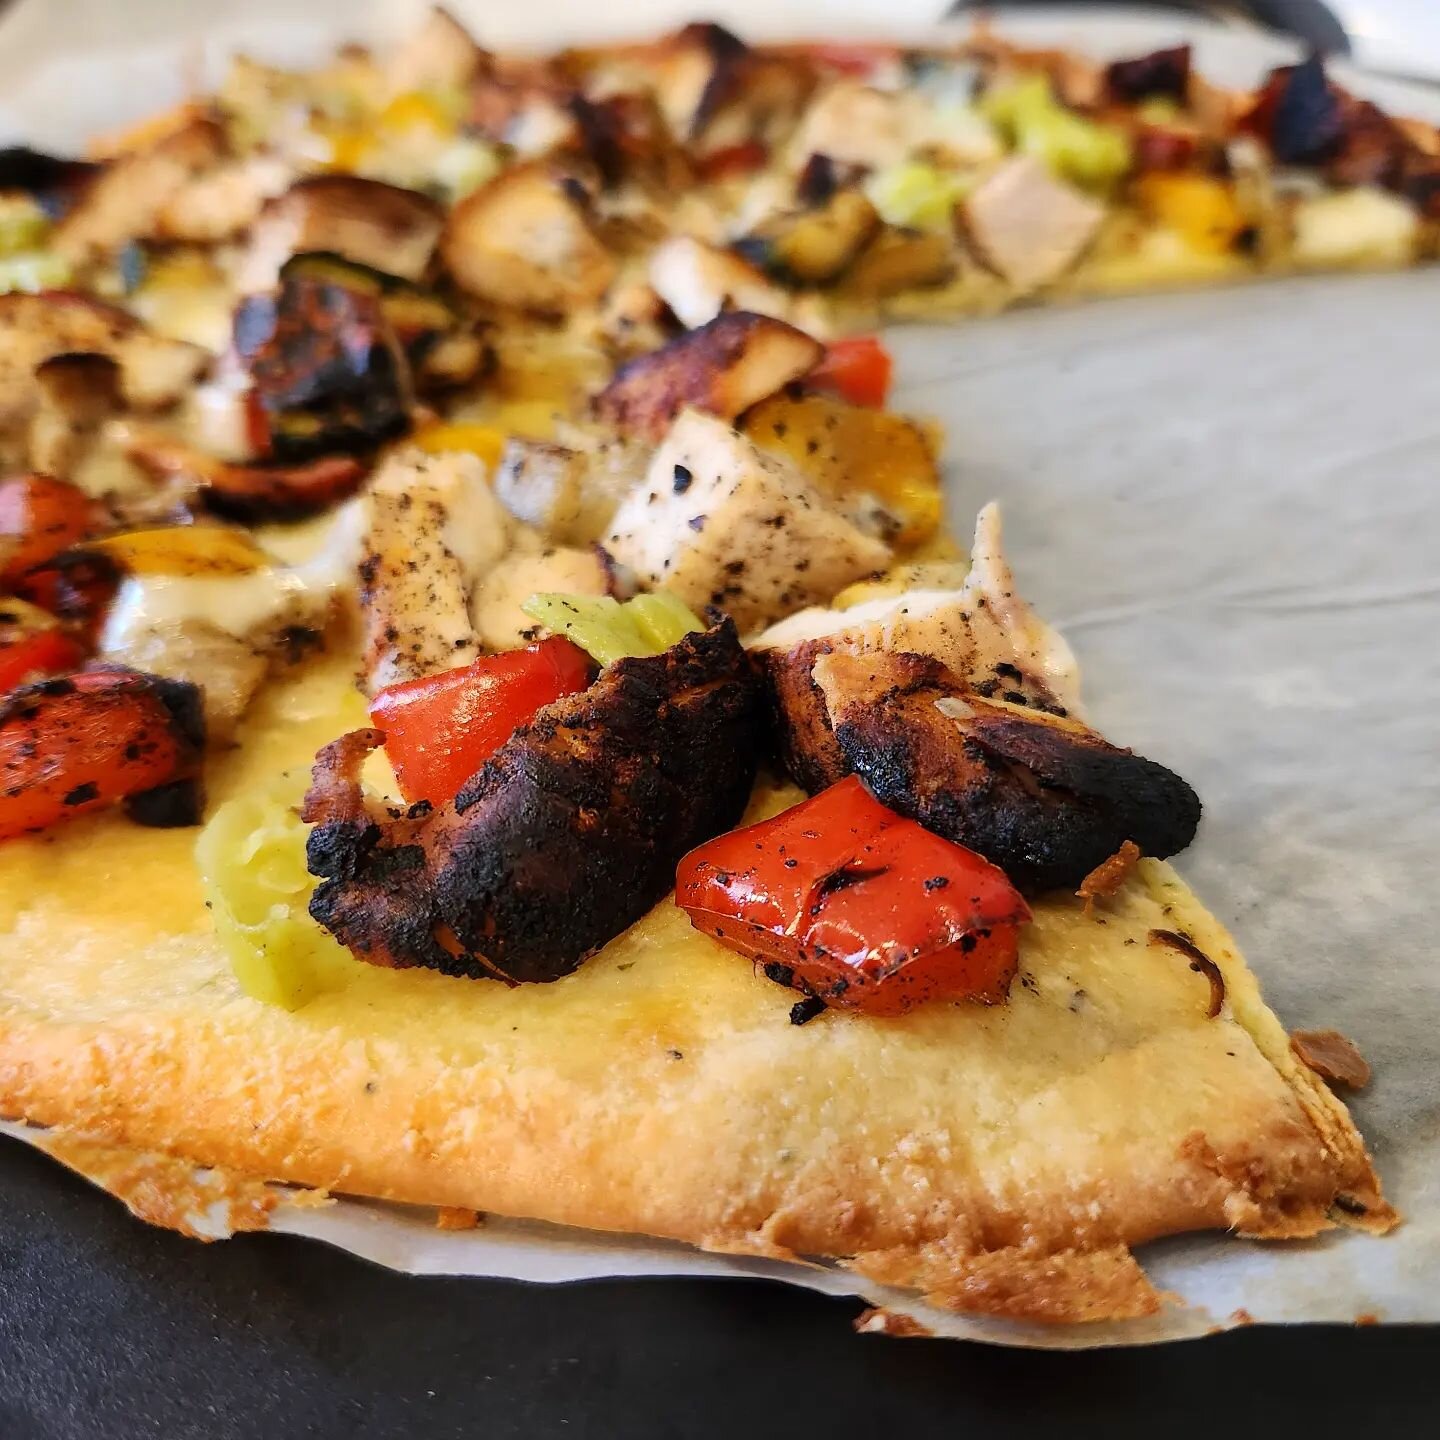 Leftover charcoal grilled chicken and veg, chopped and tossed with peperoncinis, served up on a fathead dough 🤤 Sooooo good!

#lovinitketo #keto #lowcarb #lchf #pizza #ketopizza #grainfree #fatheadpizza #fathead #charcoal